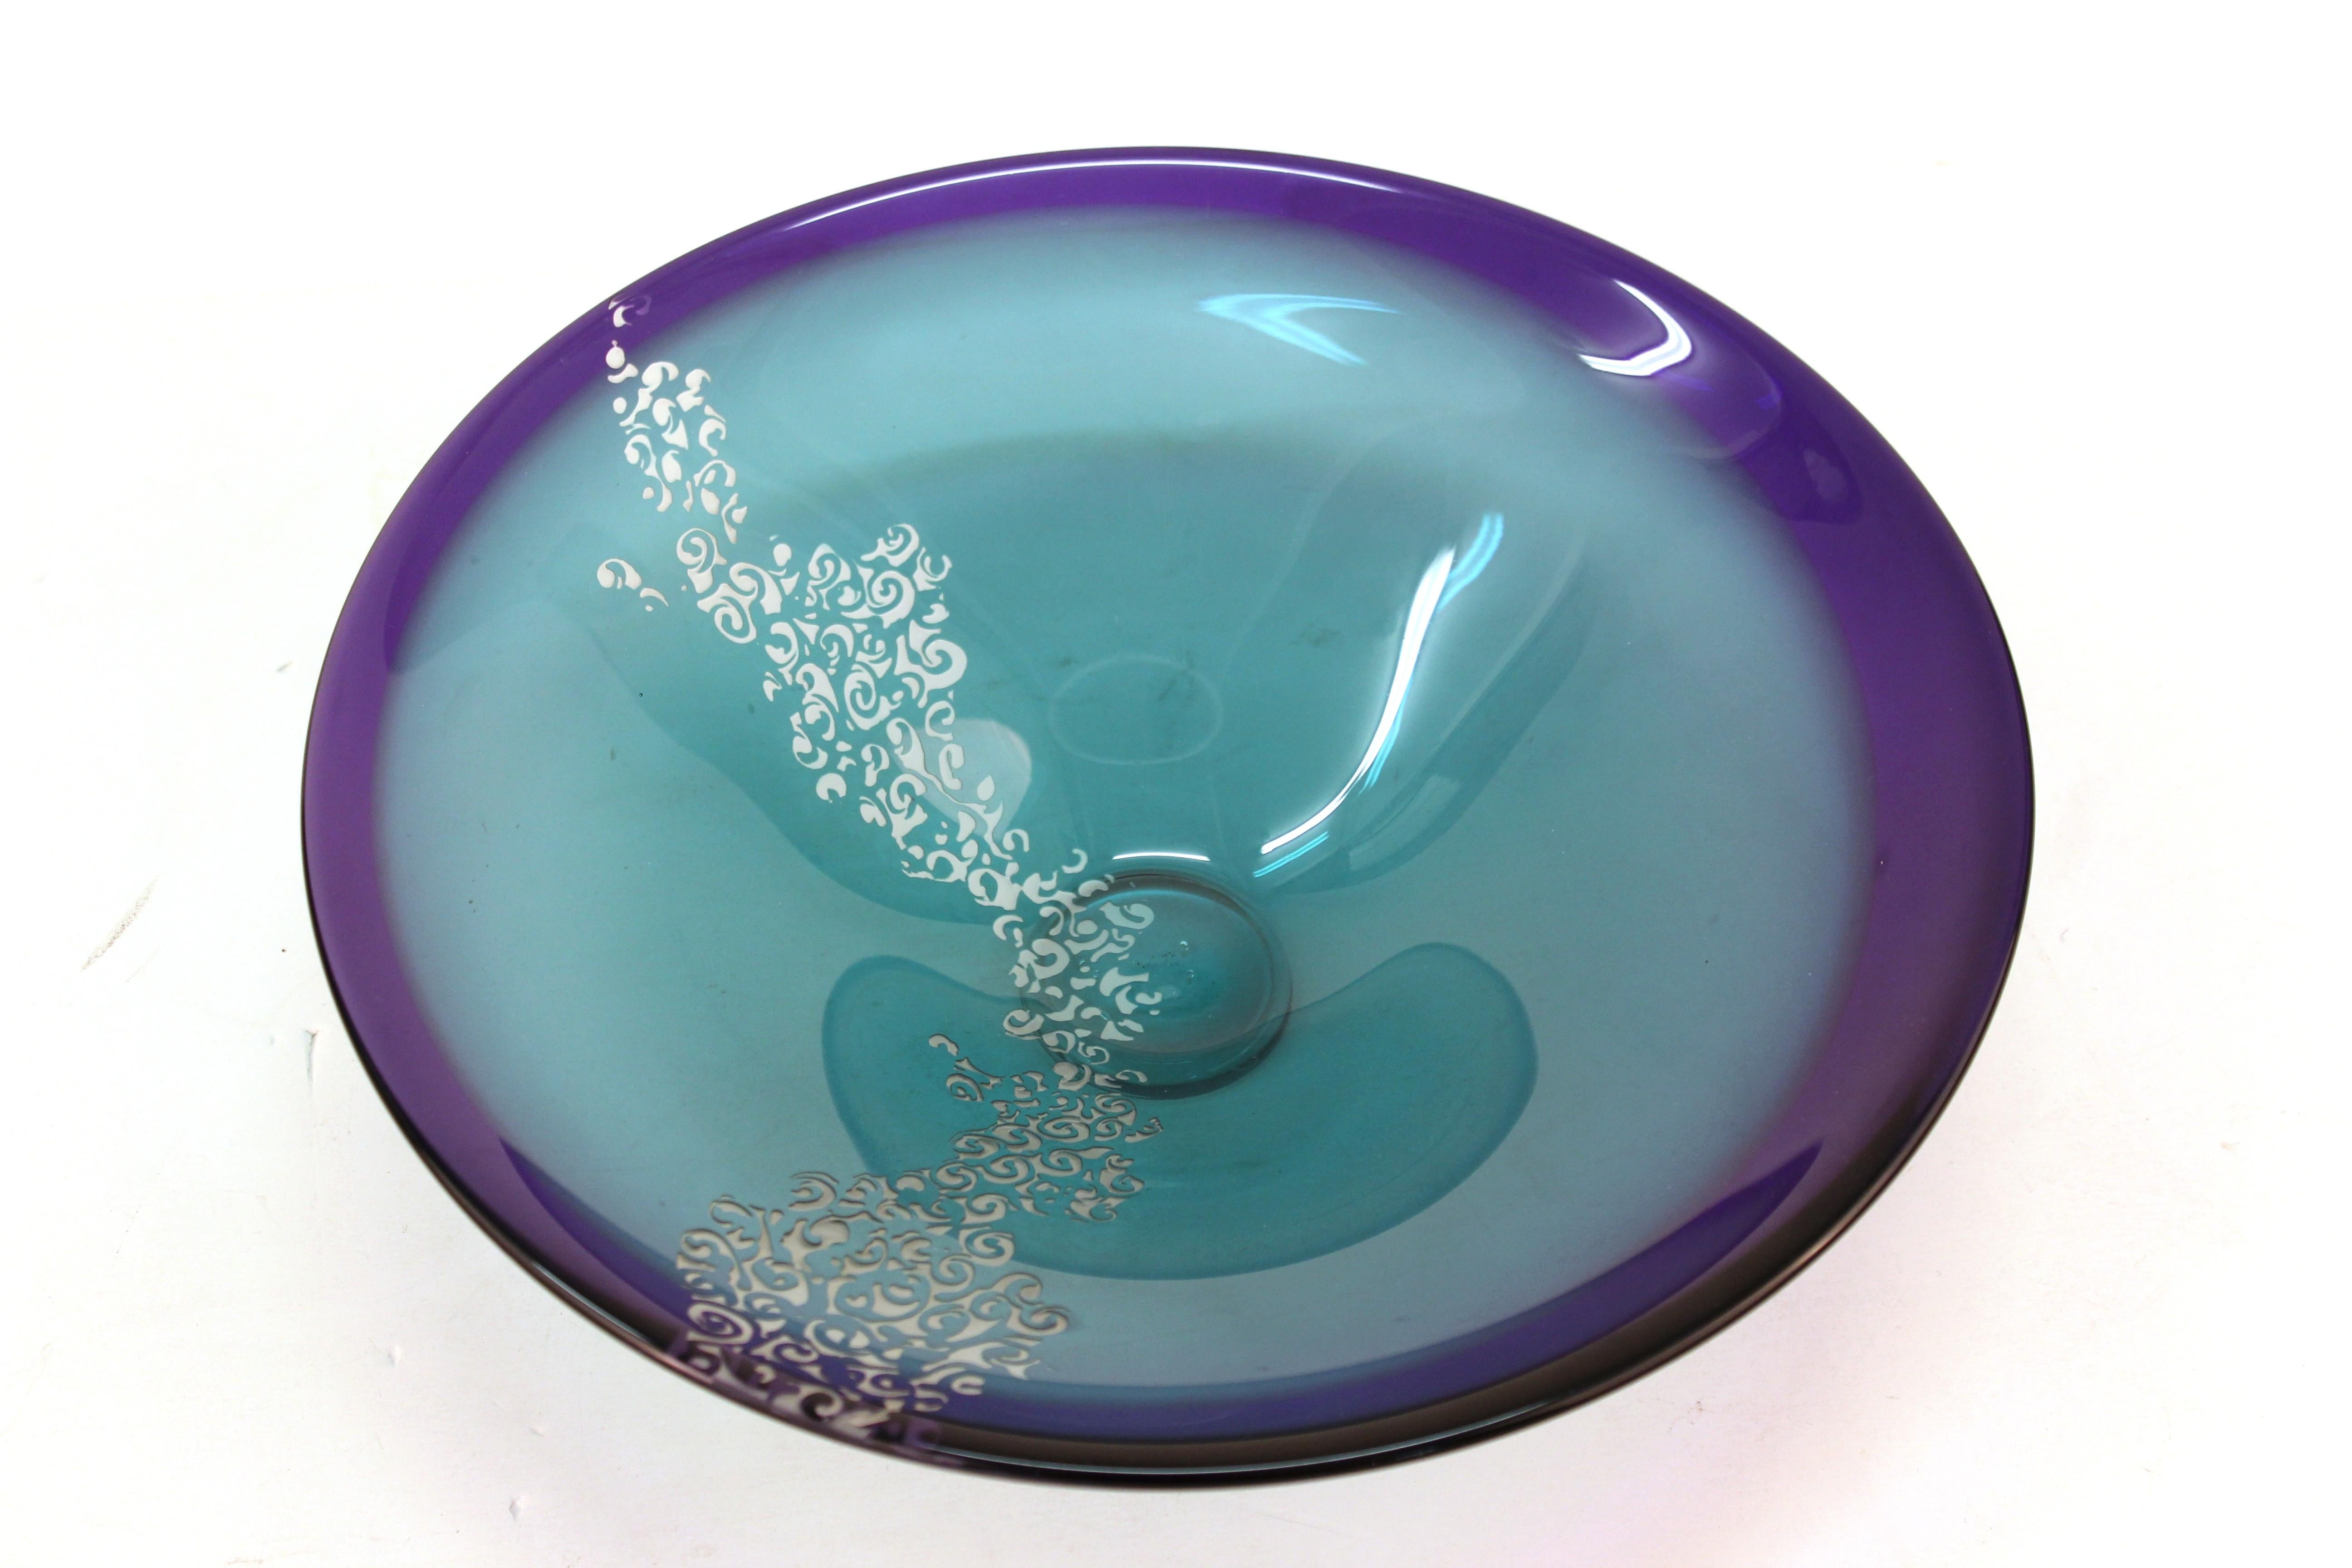 Canadian Modern studio art glass footed bowl in shades of turquoise to eggplant purple, sand blasted with a meandering band of swags, atop a glass foot. The piece was made by Canadian glass artist Cheryl Takacs and has the artists etched signature